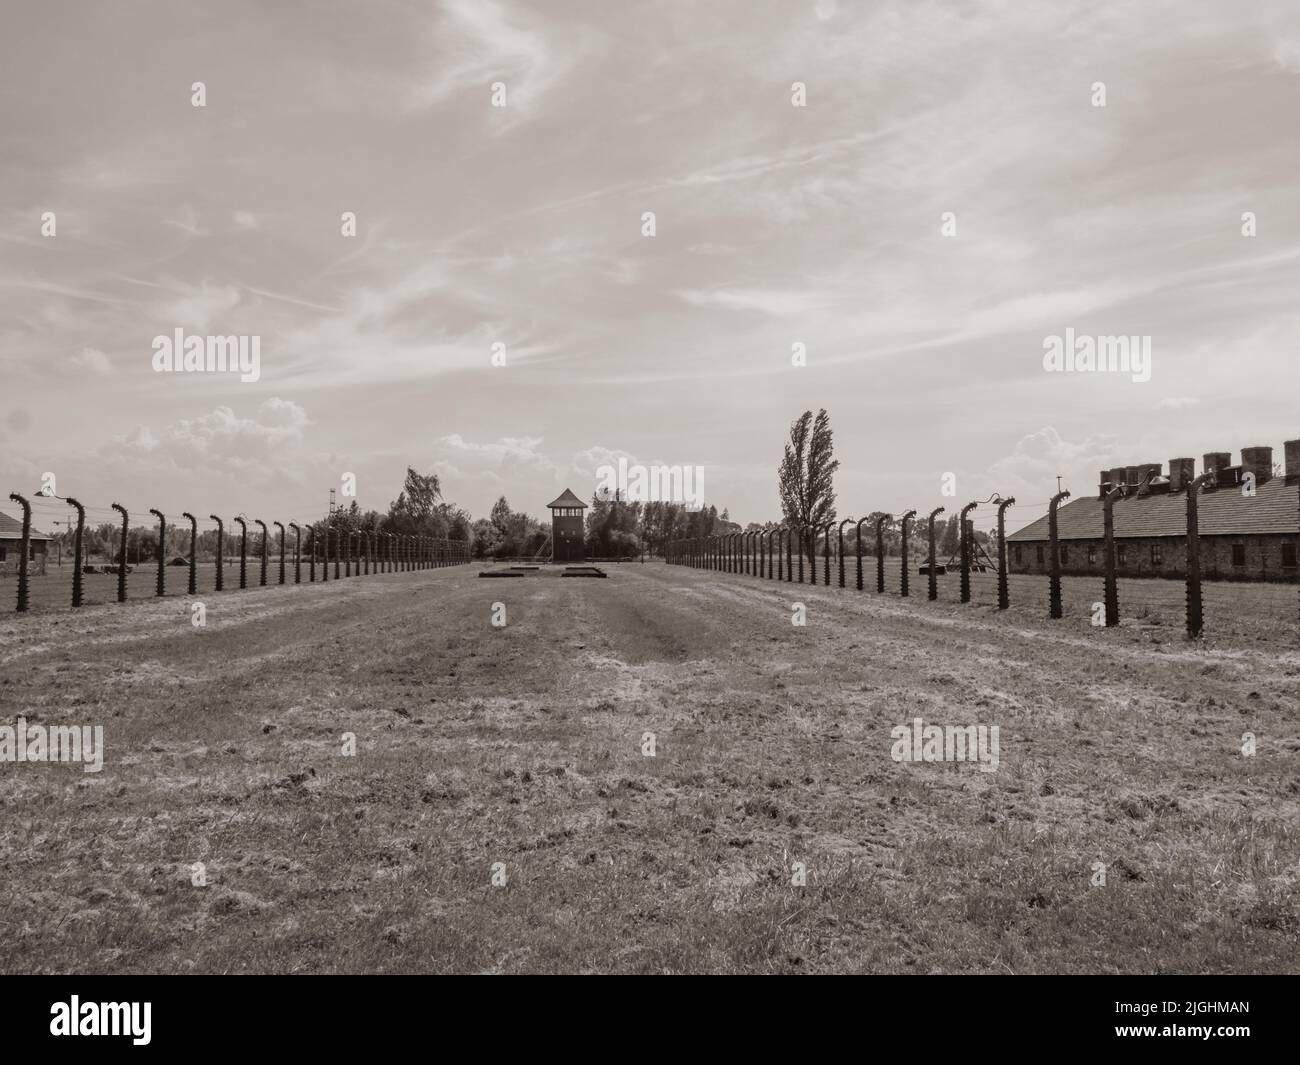 Oświęcim, Poland - June 05, 2019: Electric fence with barbed wire and watchtower at the Auschwitz-Birkenau concentration camp in Oświęcim, Poland. Eur Stock Photo